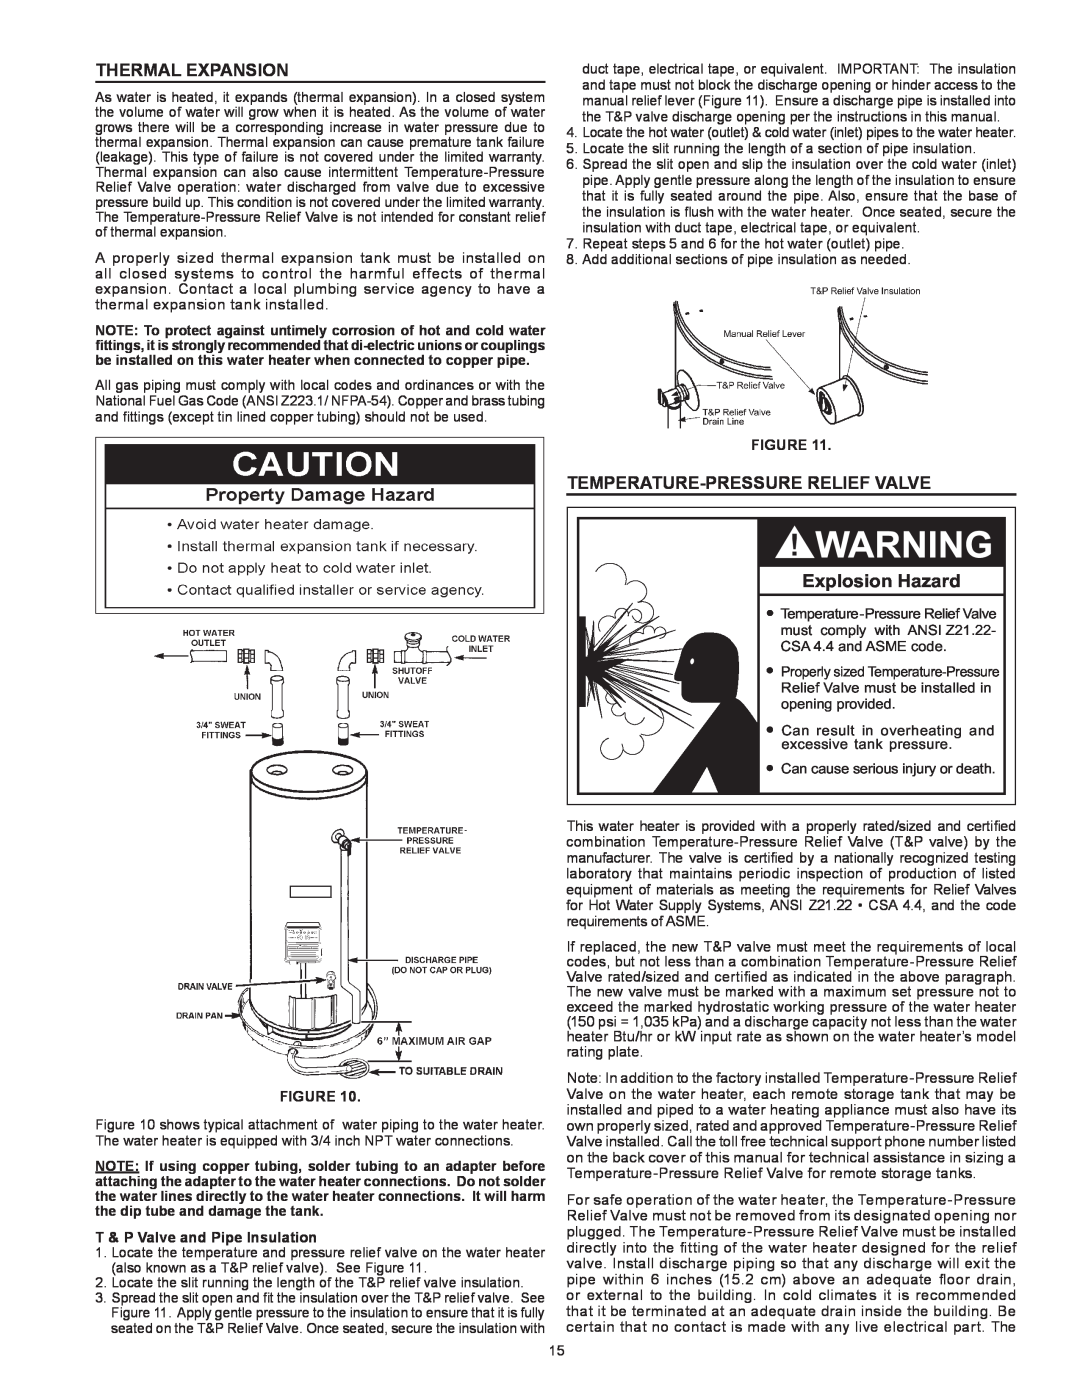 Reliance Water Heaters 317686-000 instruction manual Explosion Hazard, Thermal Expansion, Temperature-PressureRelief Valve 